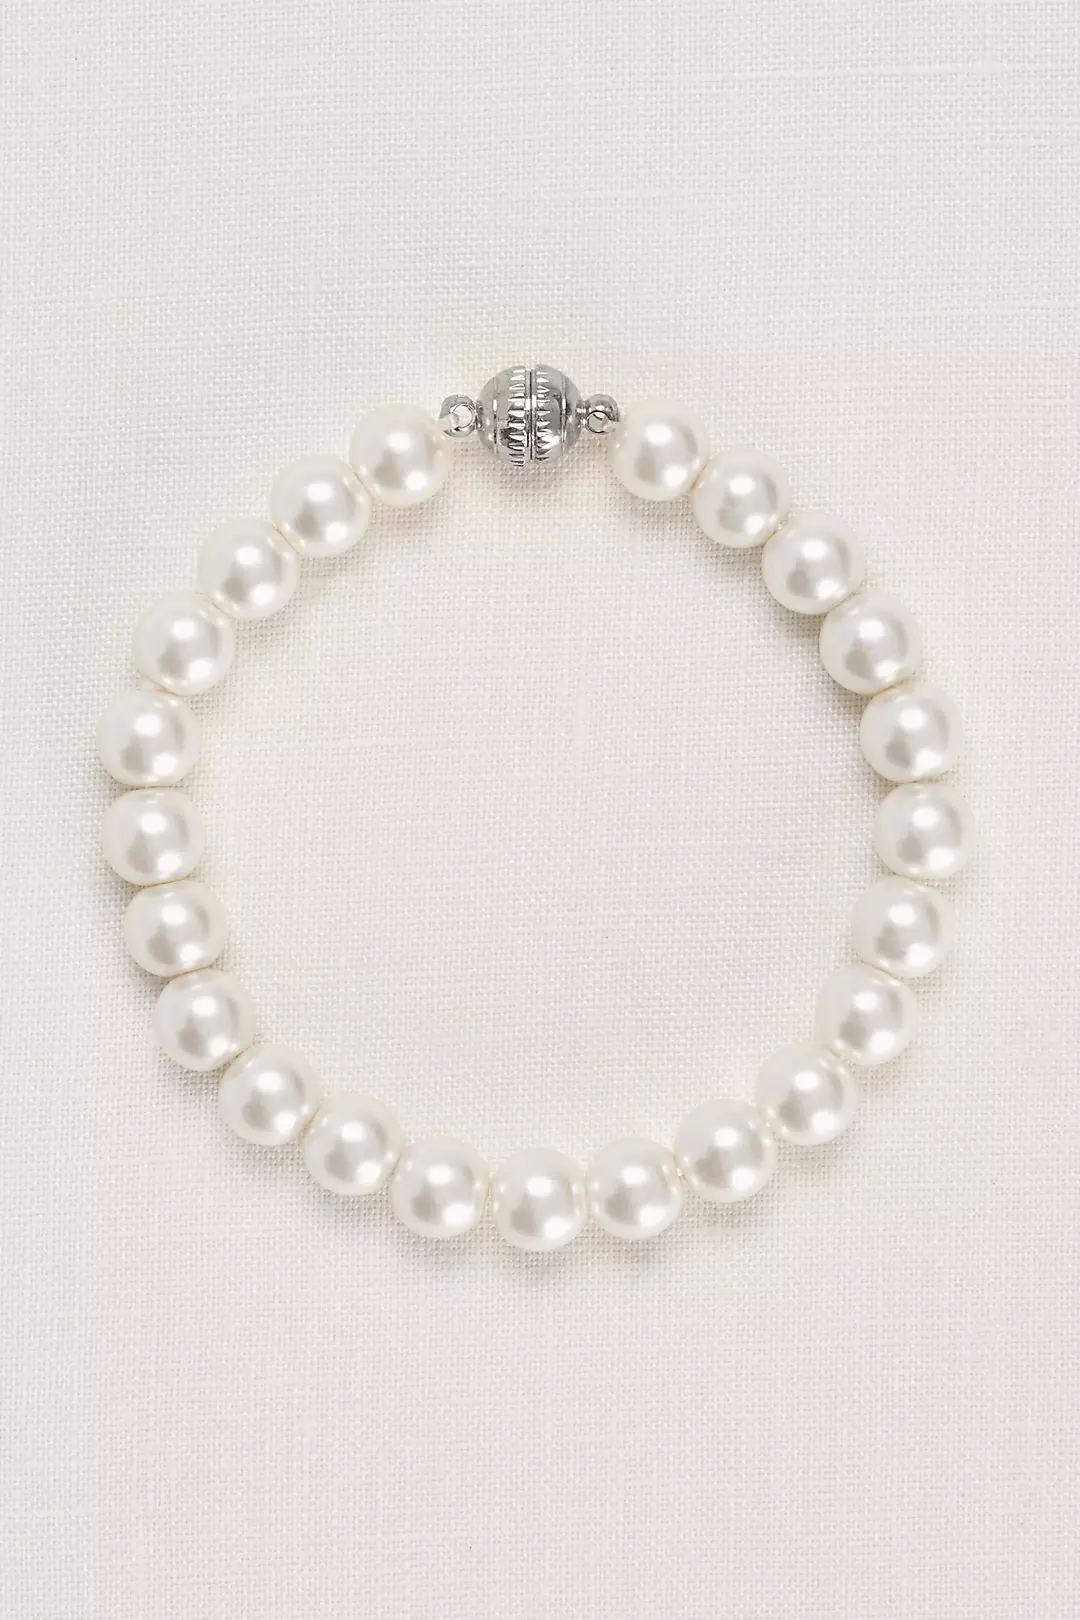 Pearl Bracelet with Magnetic Closure Image